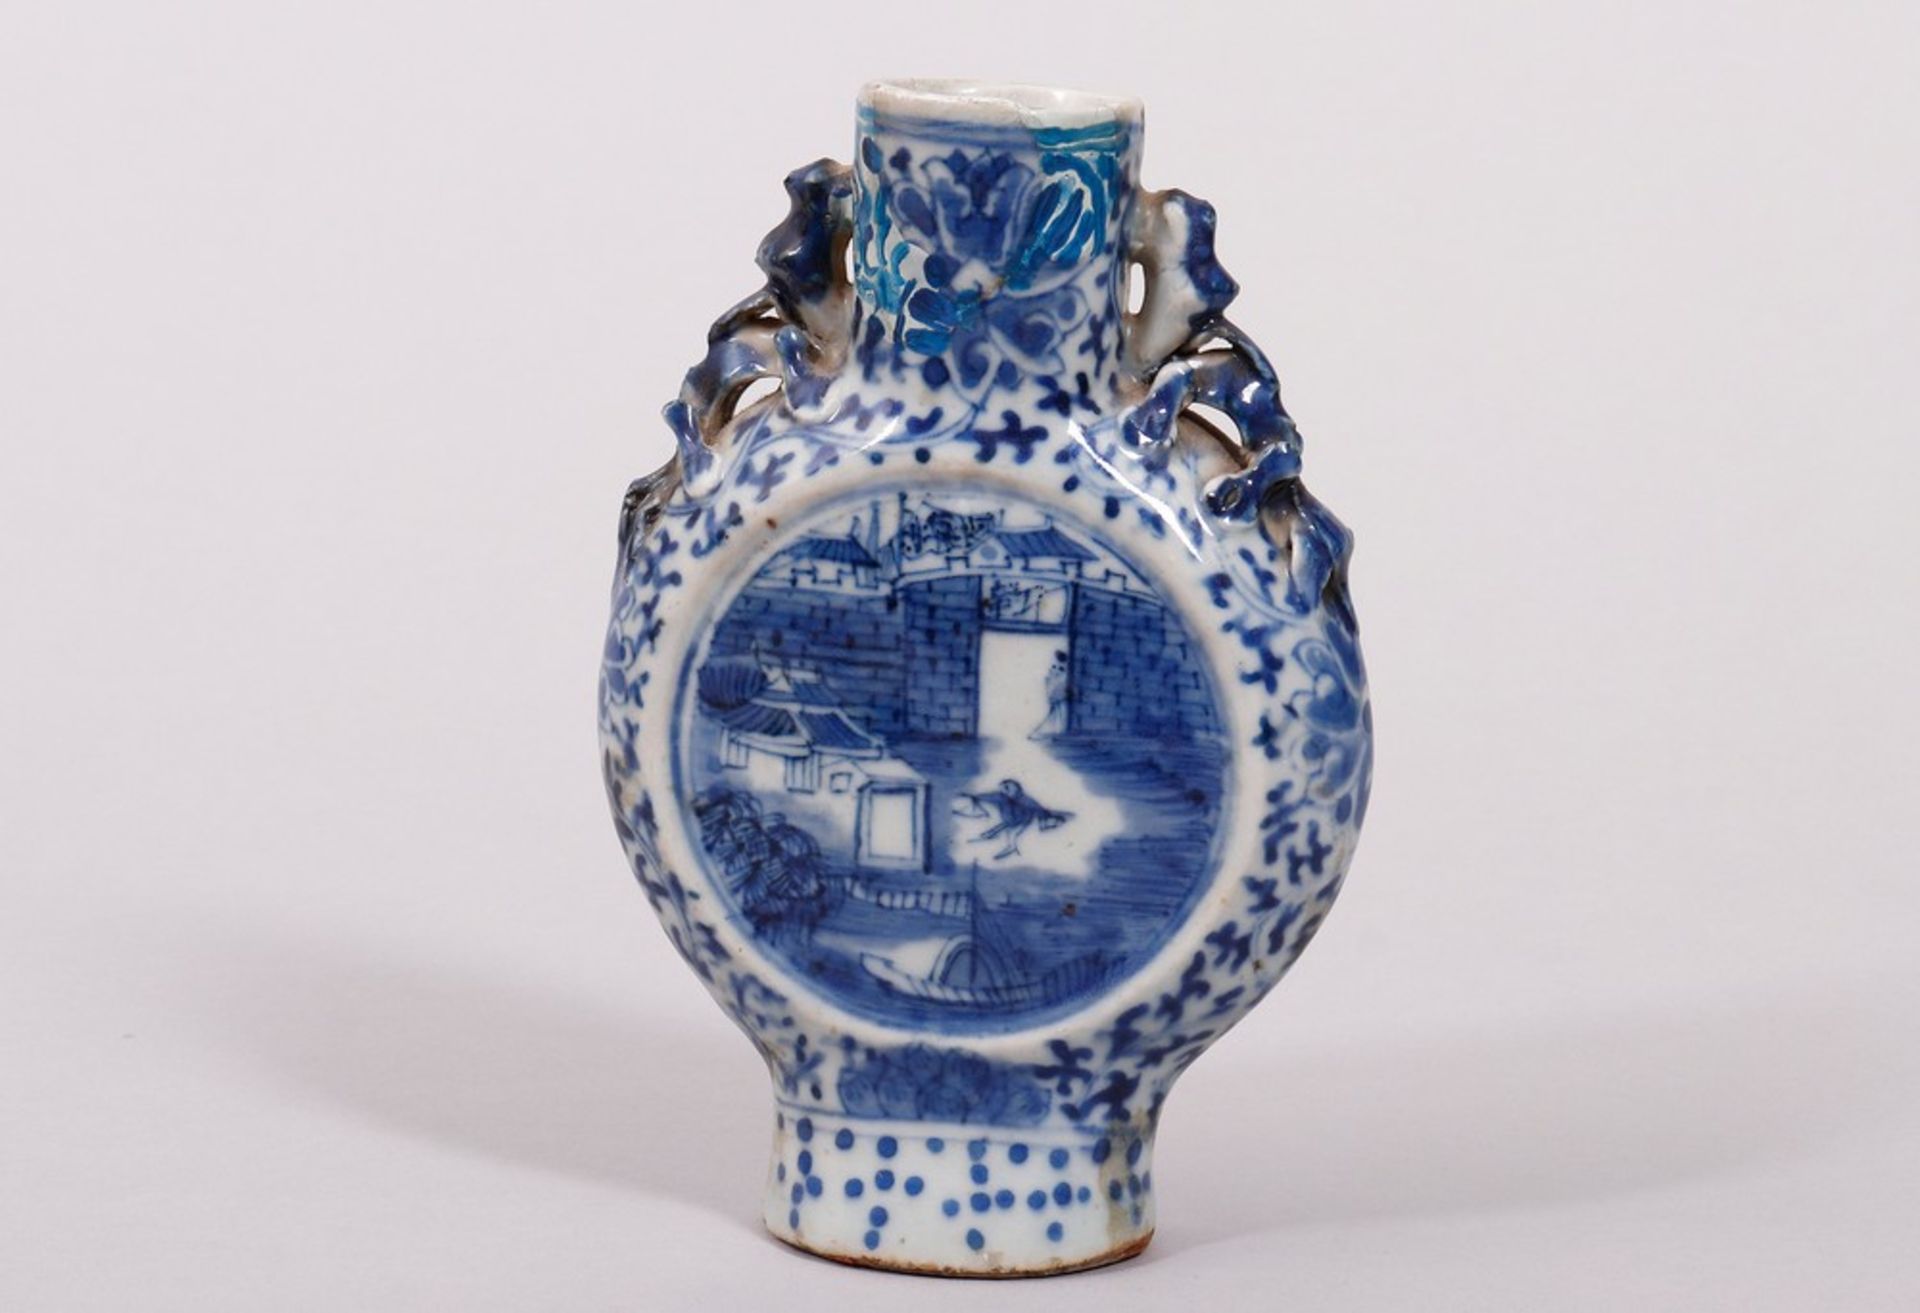 Small moon flask, China, Qing period (1644-1911), c. 1900 - Image 2 of 4